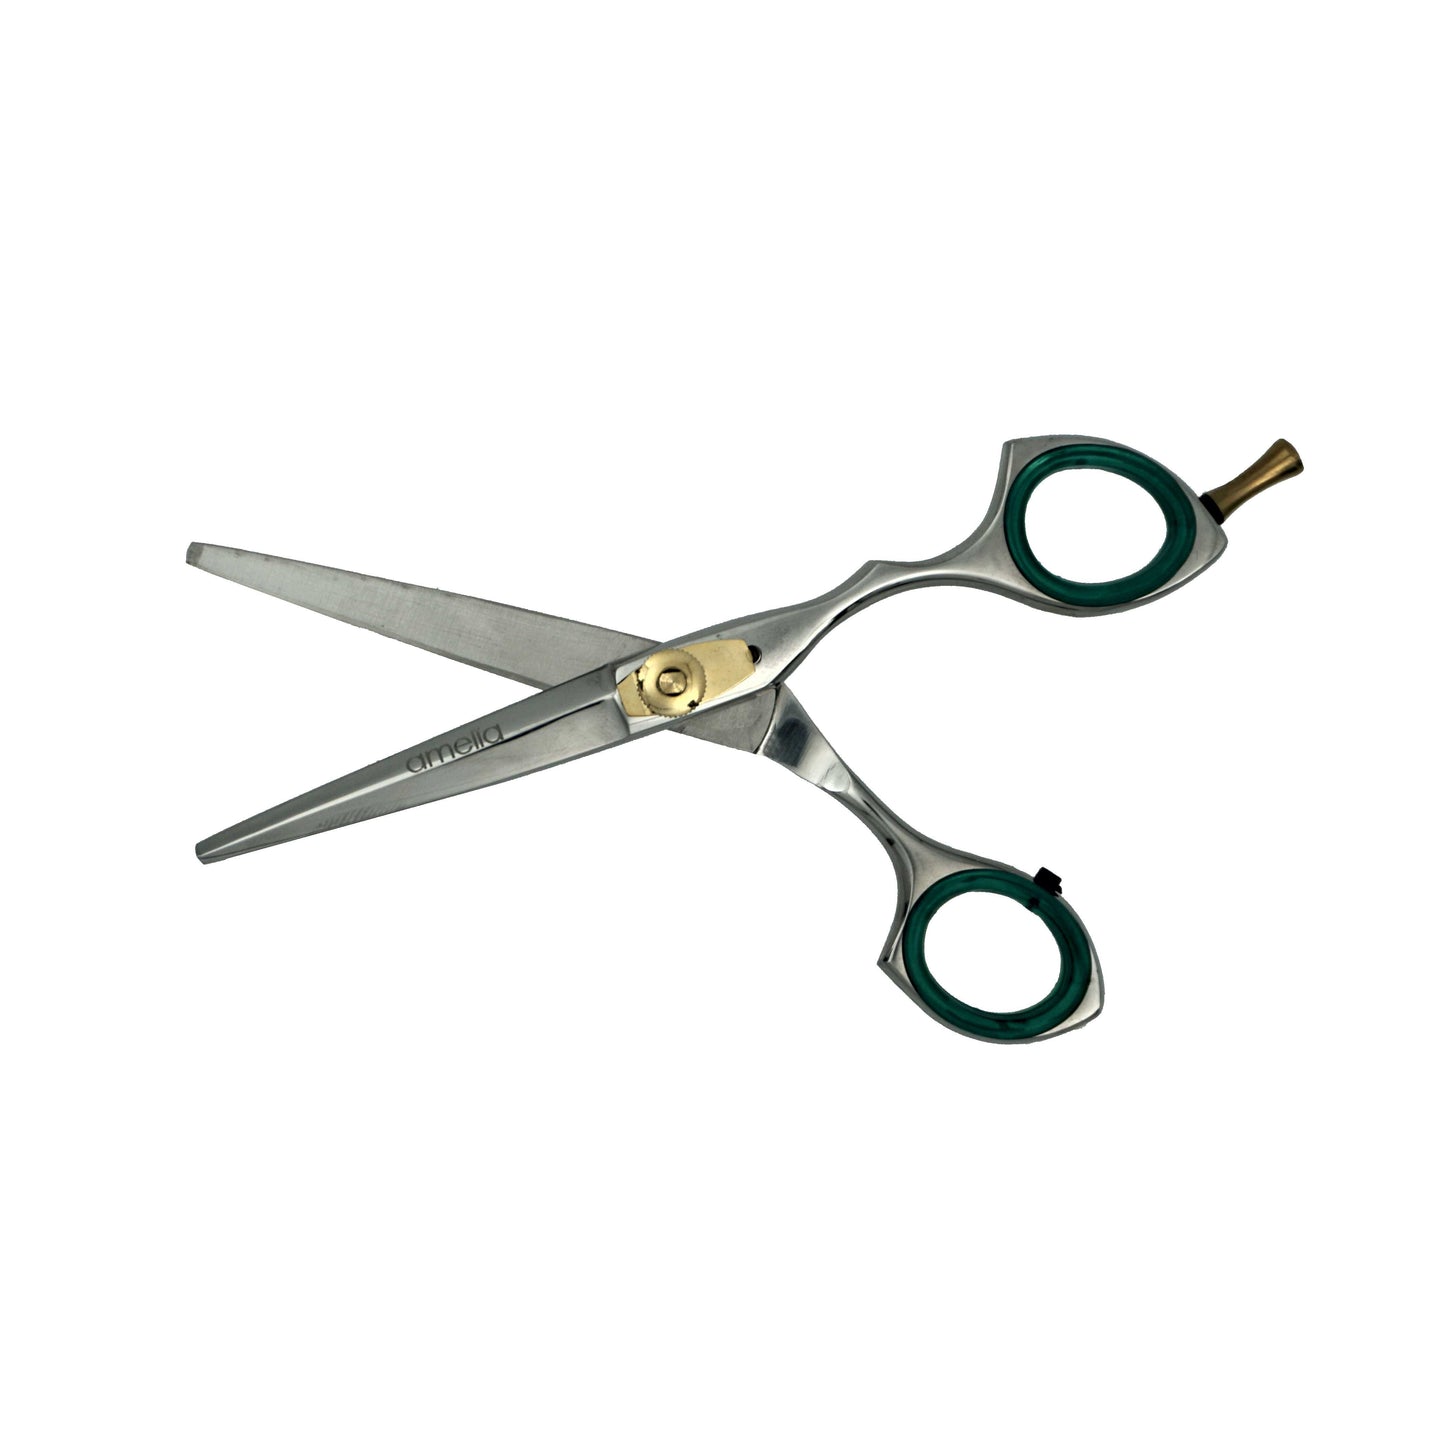 5.5" Right Handed, Stainless Steel Professional Shear, Removable Finger Rest